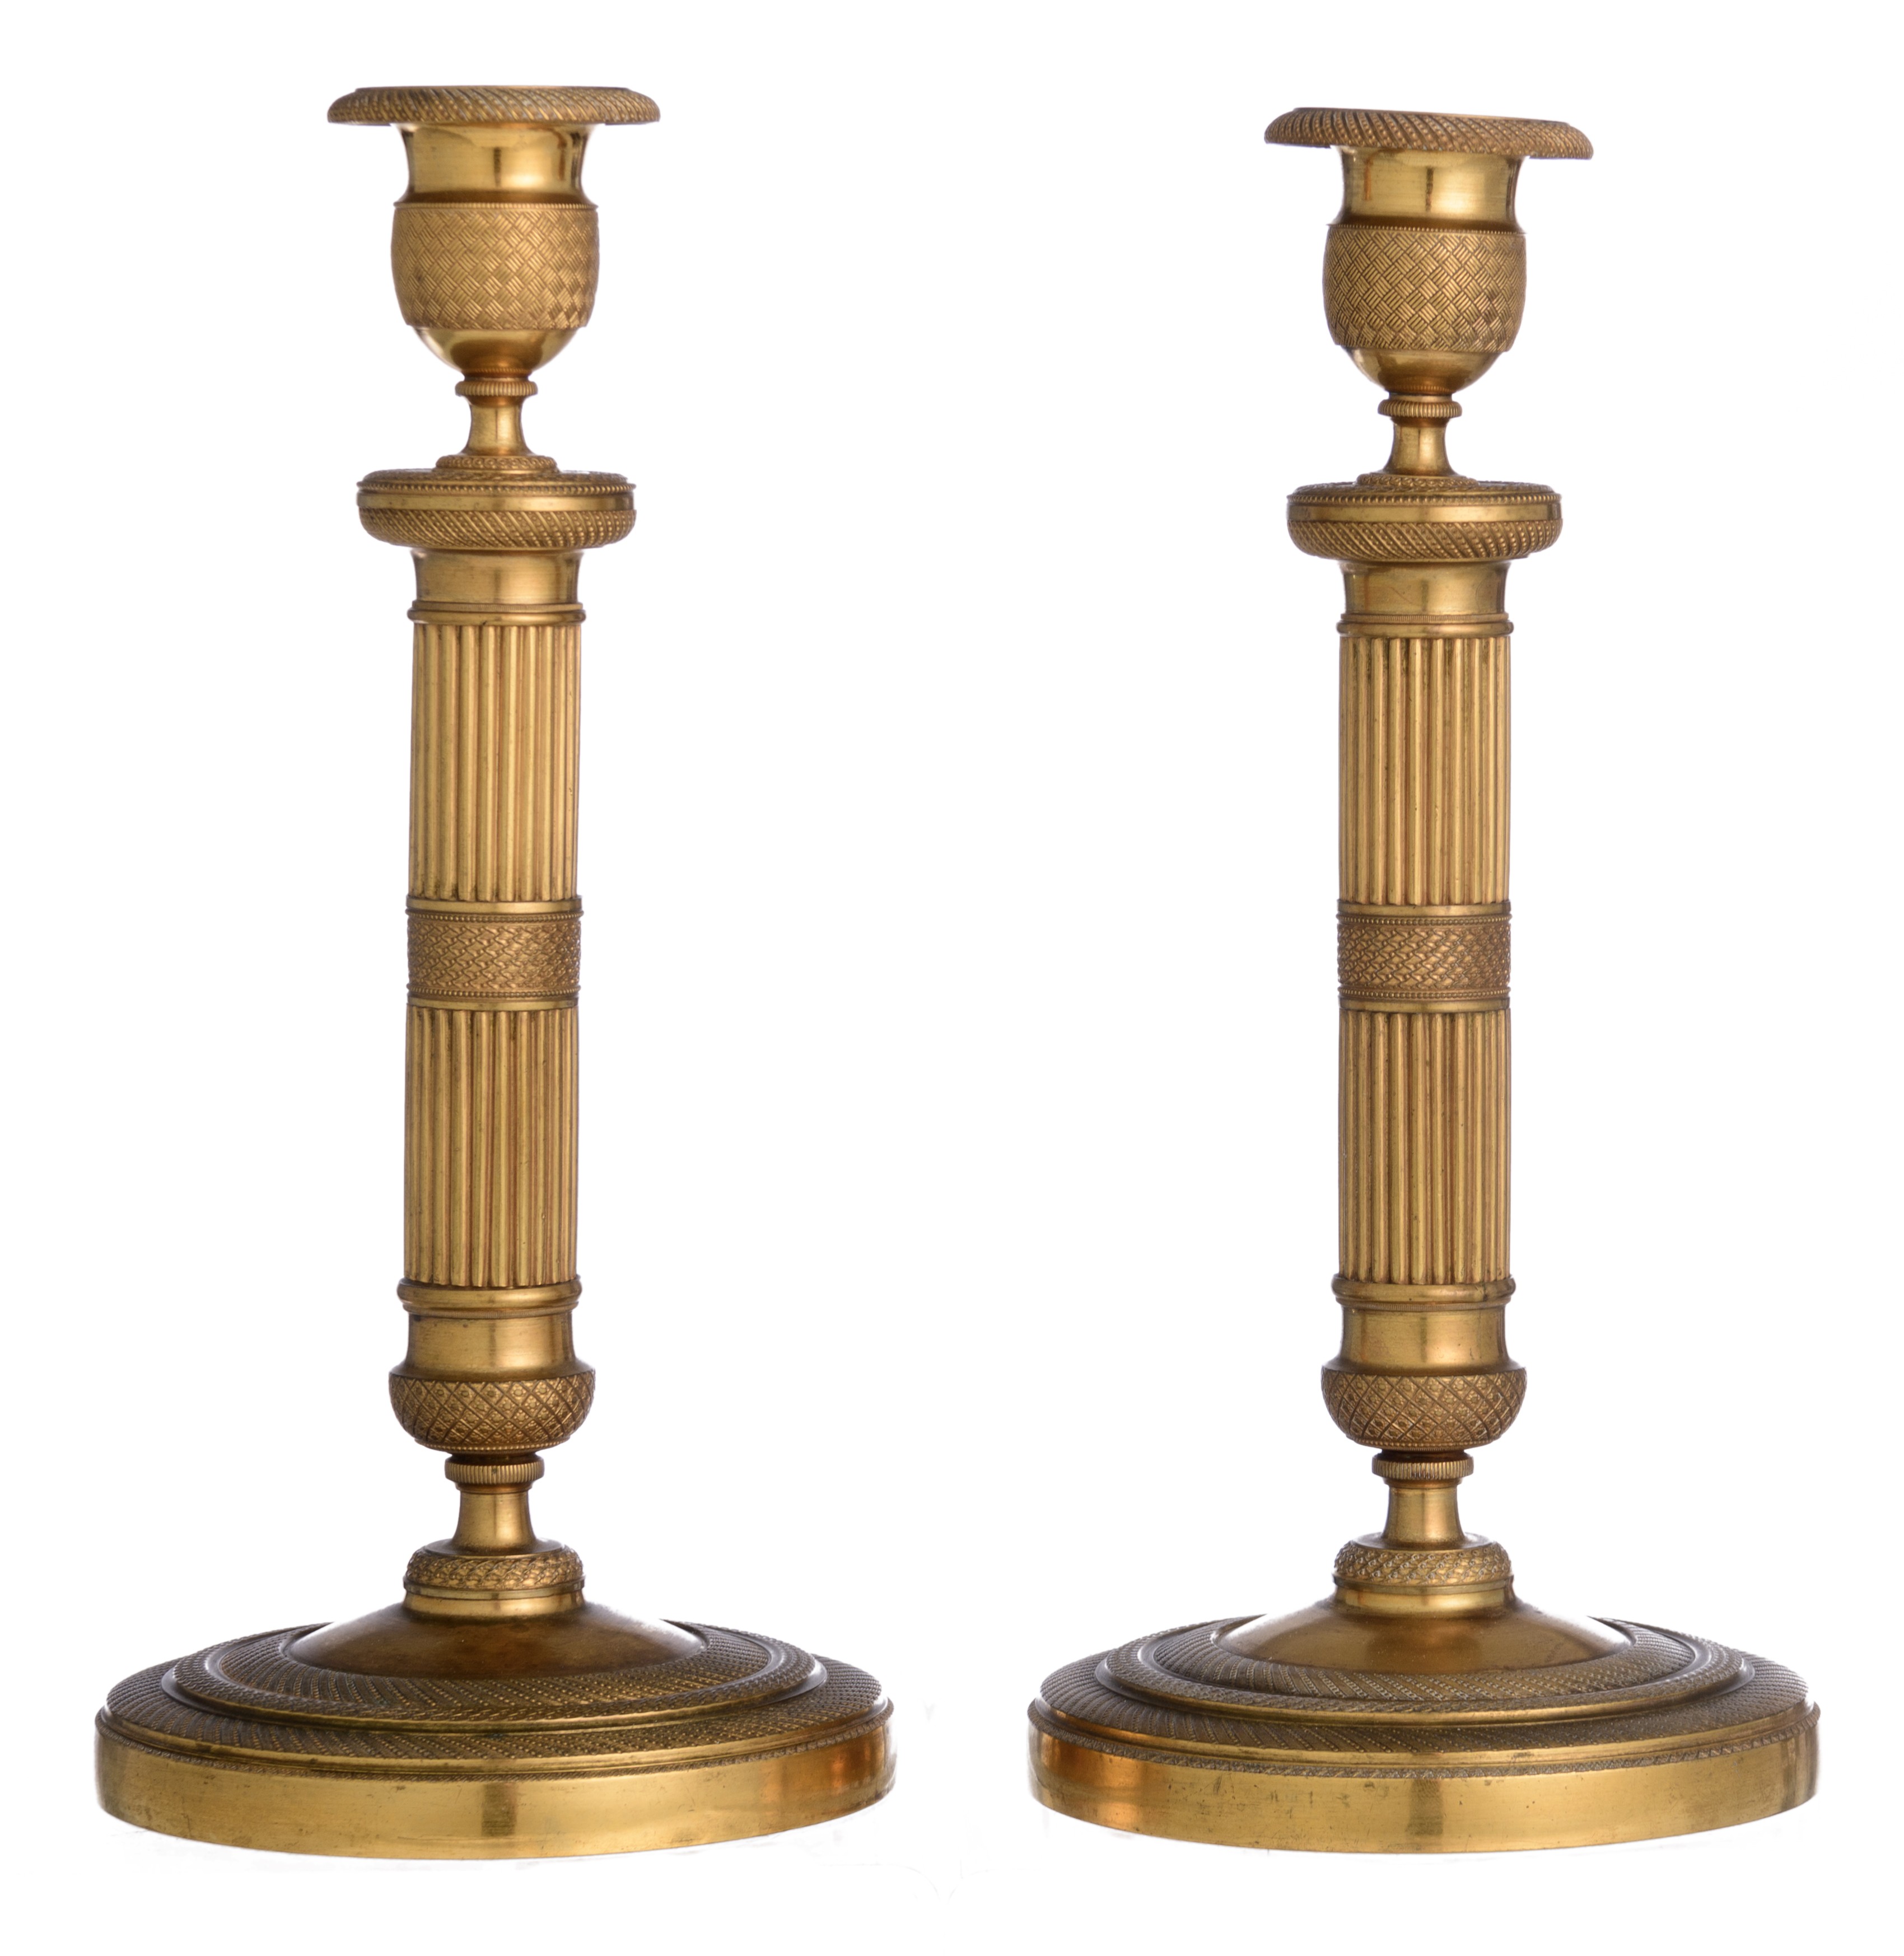 A French Charles X style mantle clock, and a ditto pair of period candlesticks, H 28,5 - 34 cm - Image 16 of 18